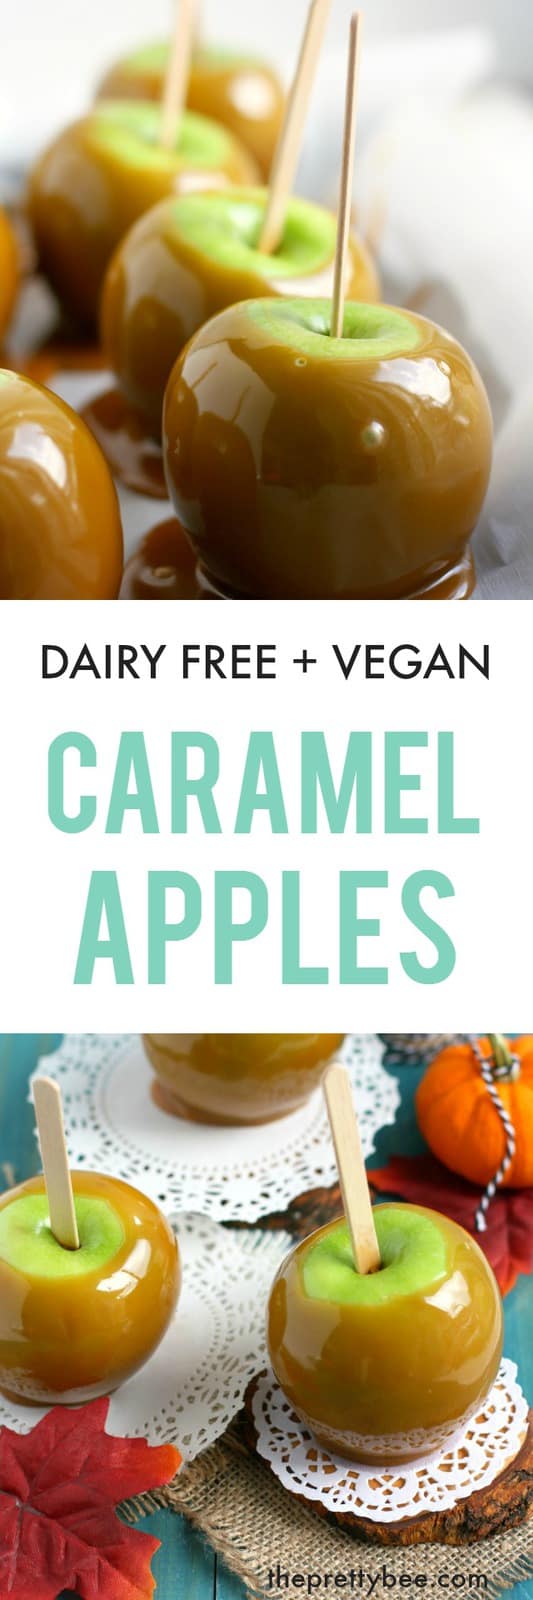 Delicious apples are coated in sweet, decadent caramel. A dairy free treat!